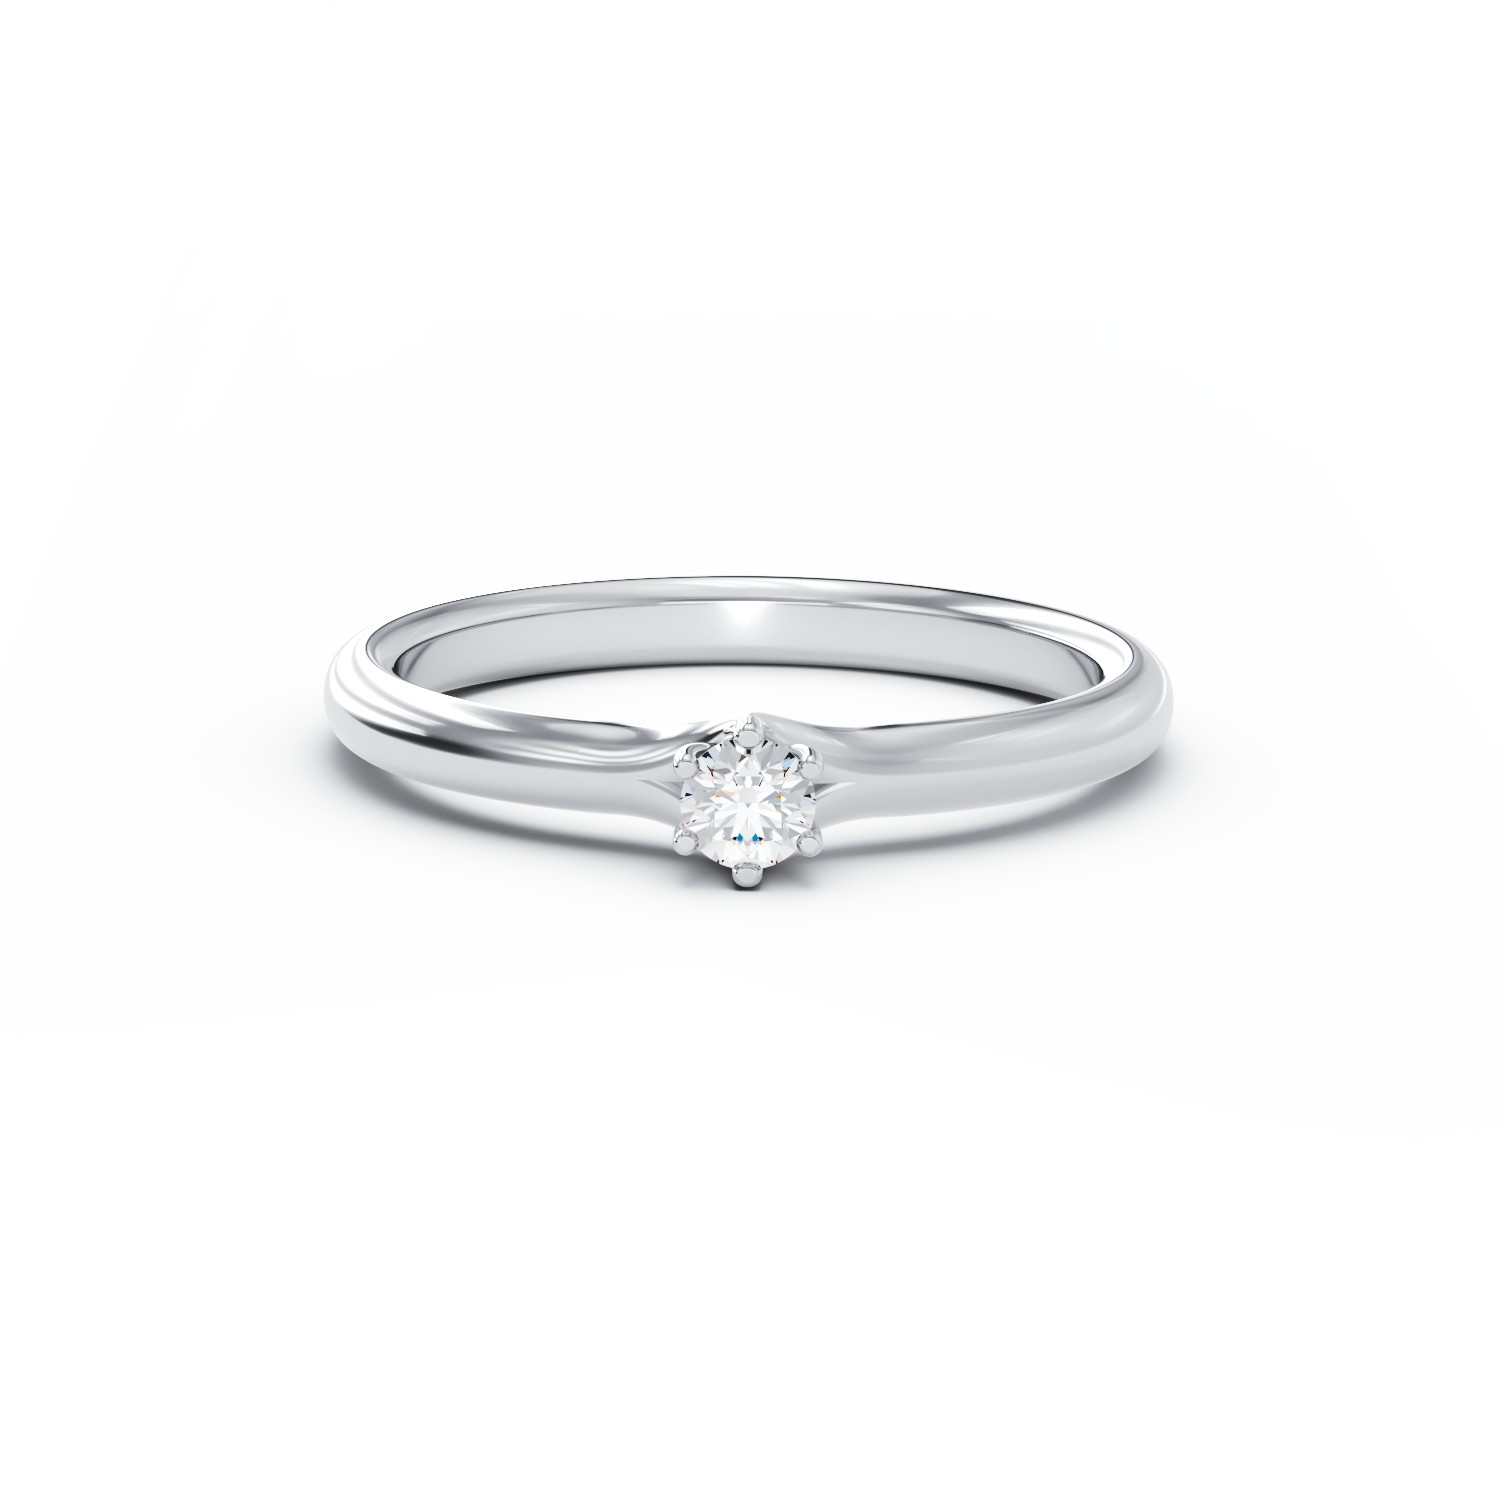 White gold engagement ring with 0.15ct solitaire diamond